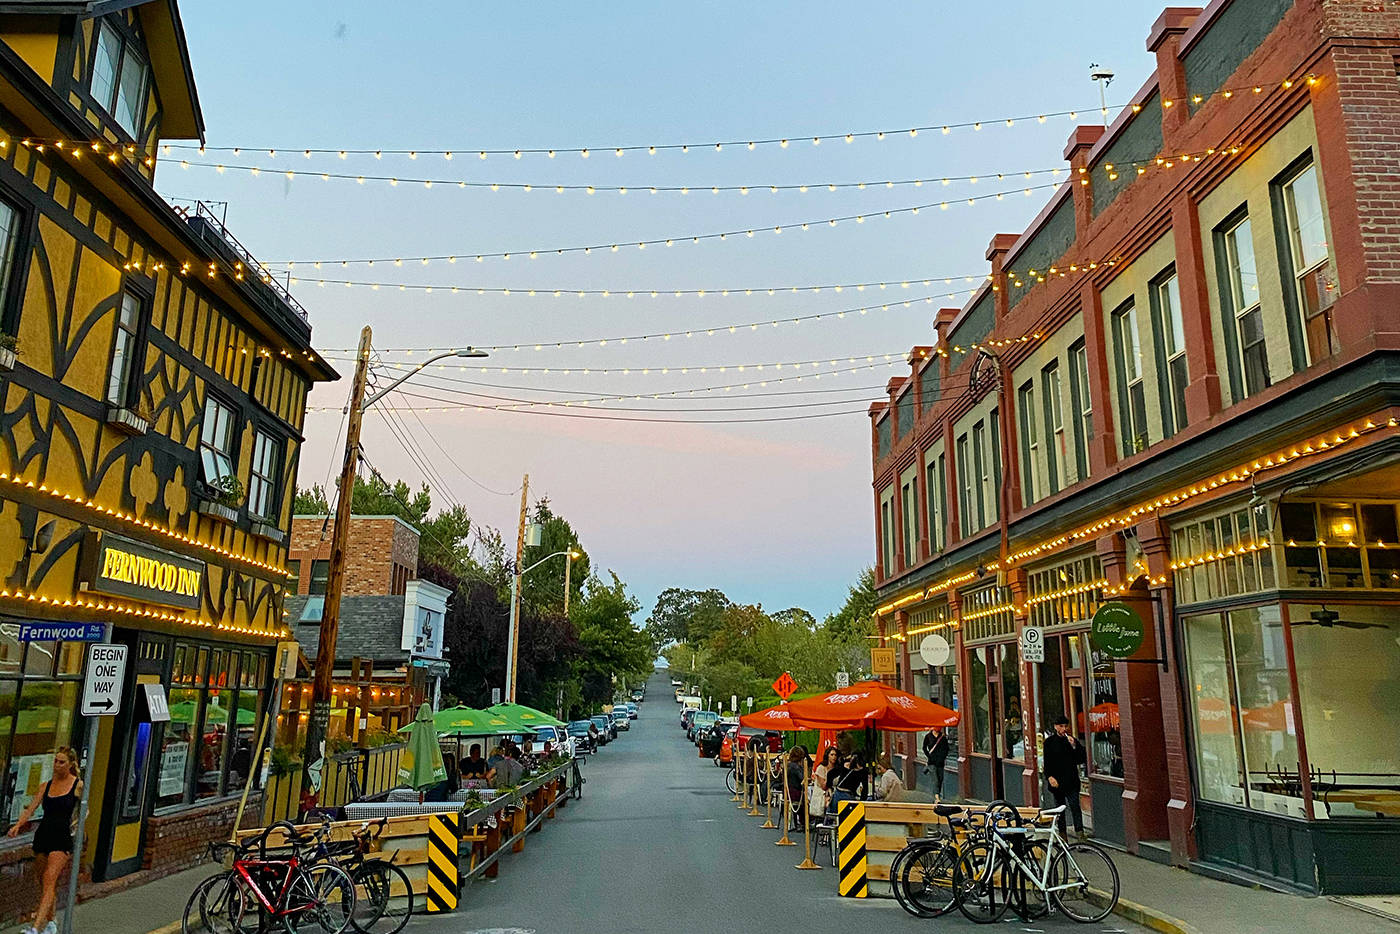 Chambers of commerce from across B.C. have endorsed a plan to tackle key social and economic factors impacting cities, which they say will also support businesses attempting to recover from the pandemic. (Photo courtesy of Build Back Victoria)